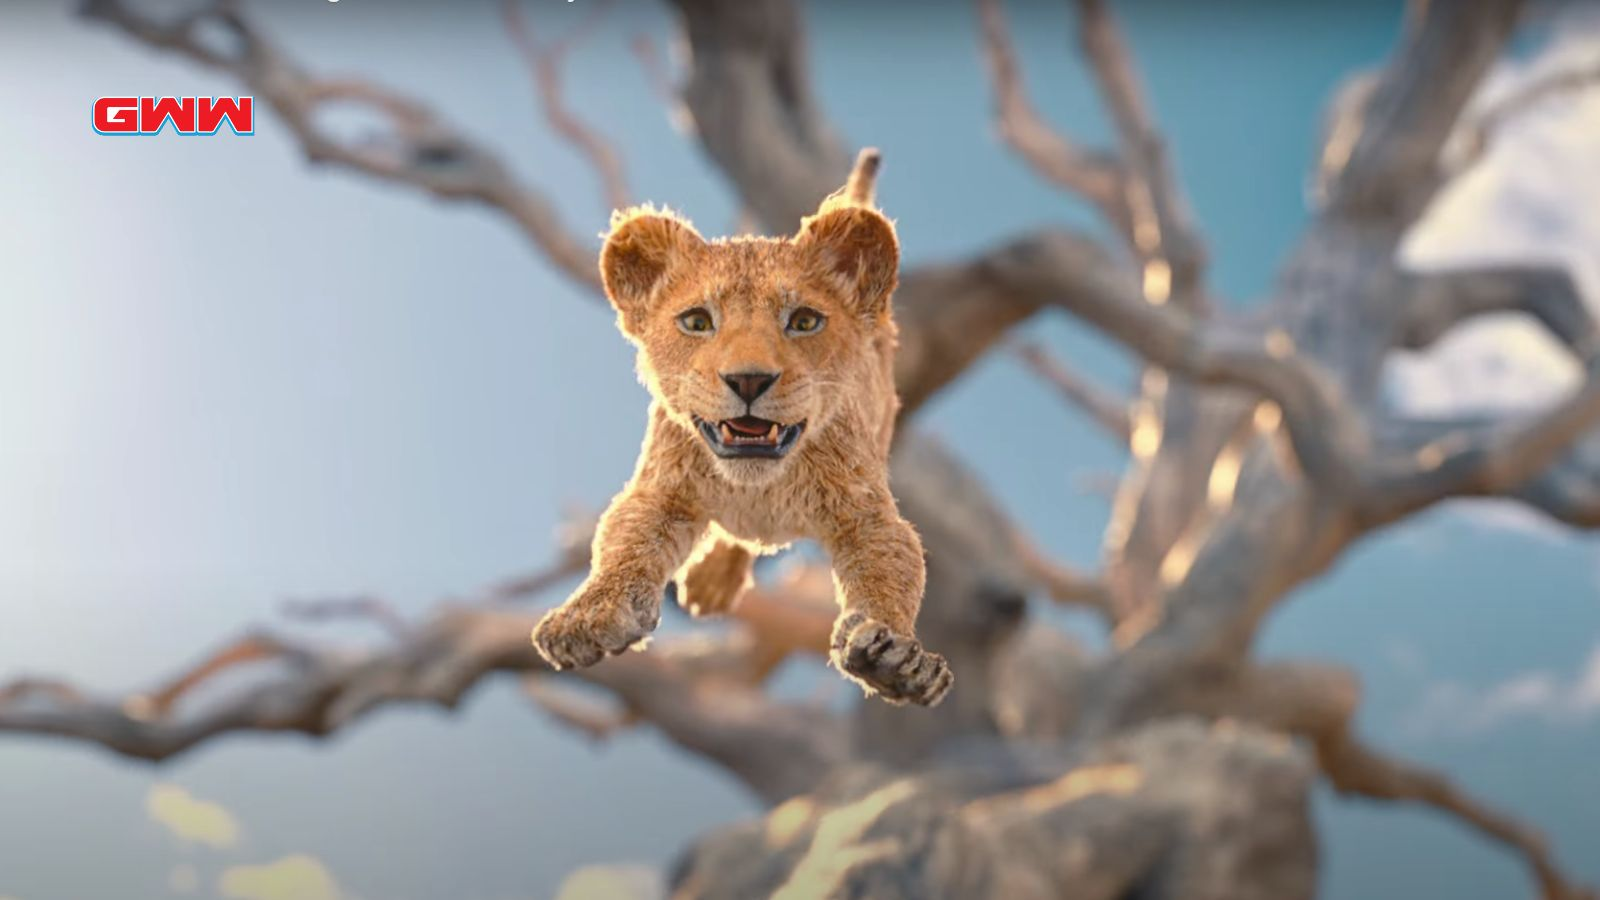 Young Simba jumping from a tree, Mufasa: The Lion King movie